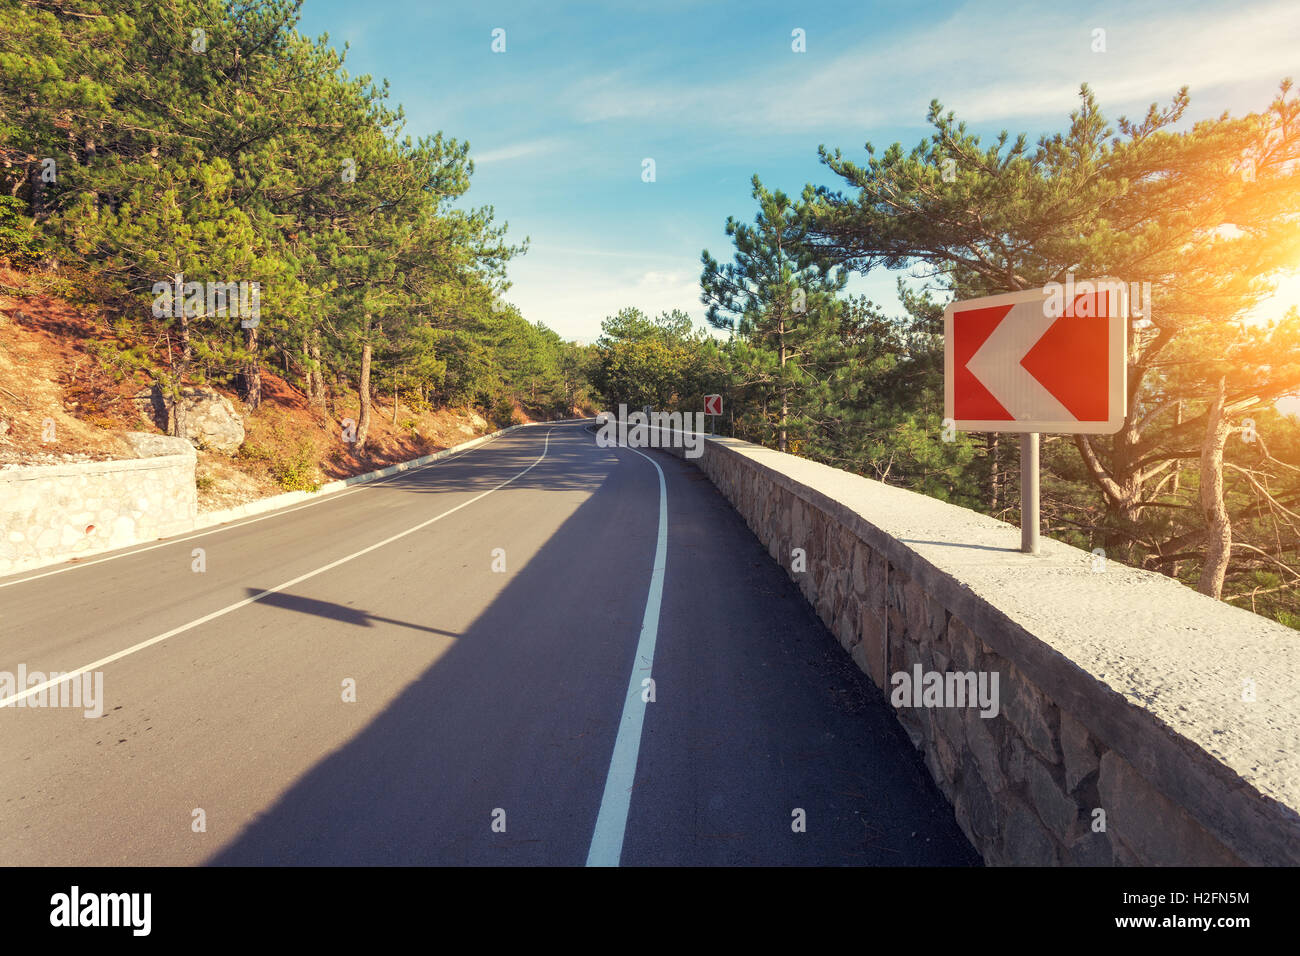 Asphalt road with road sign in the forest at colorful sunrise. Beautiful landscape with road, trees, blue sky in summer. Vintage Stock Photo